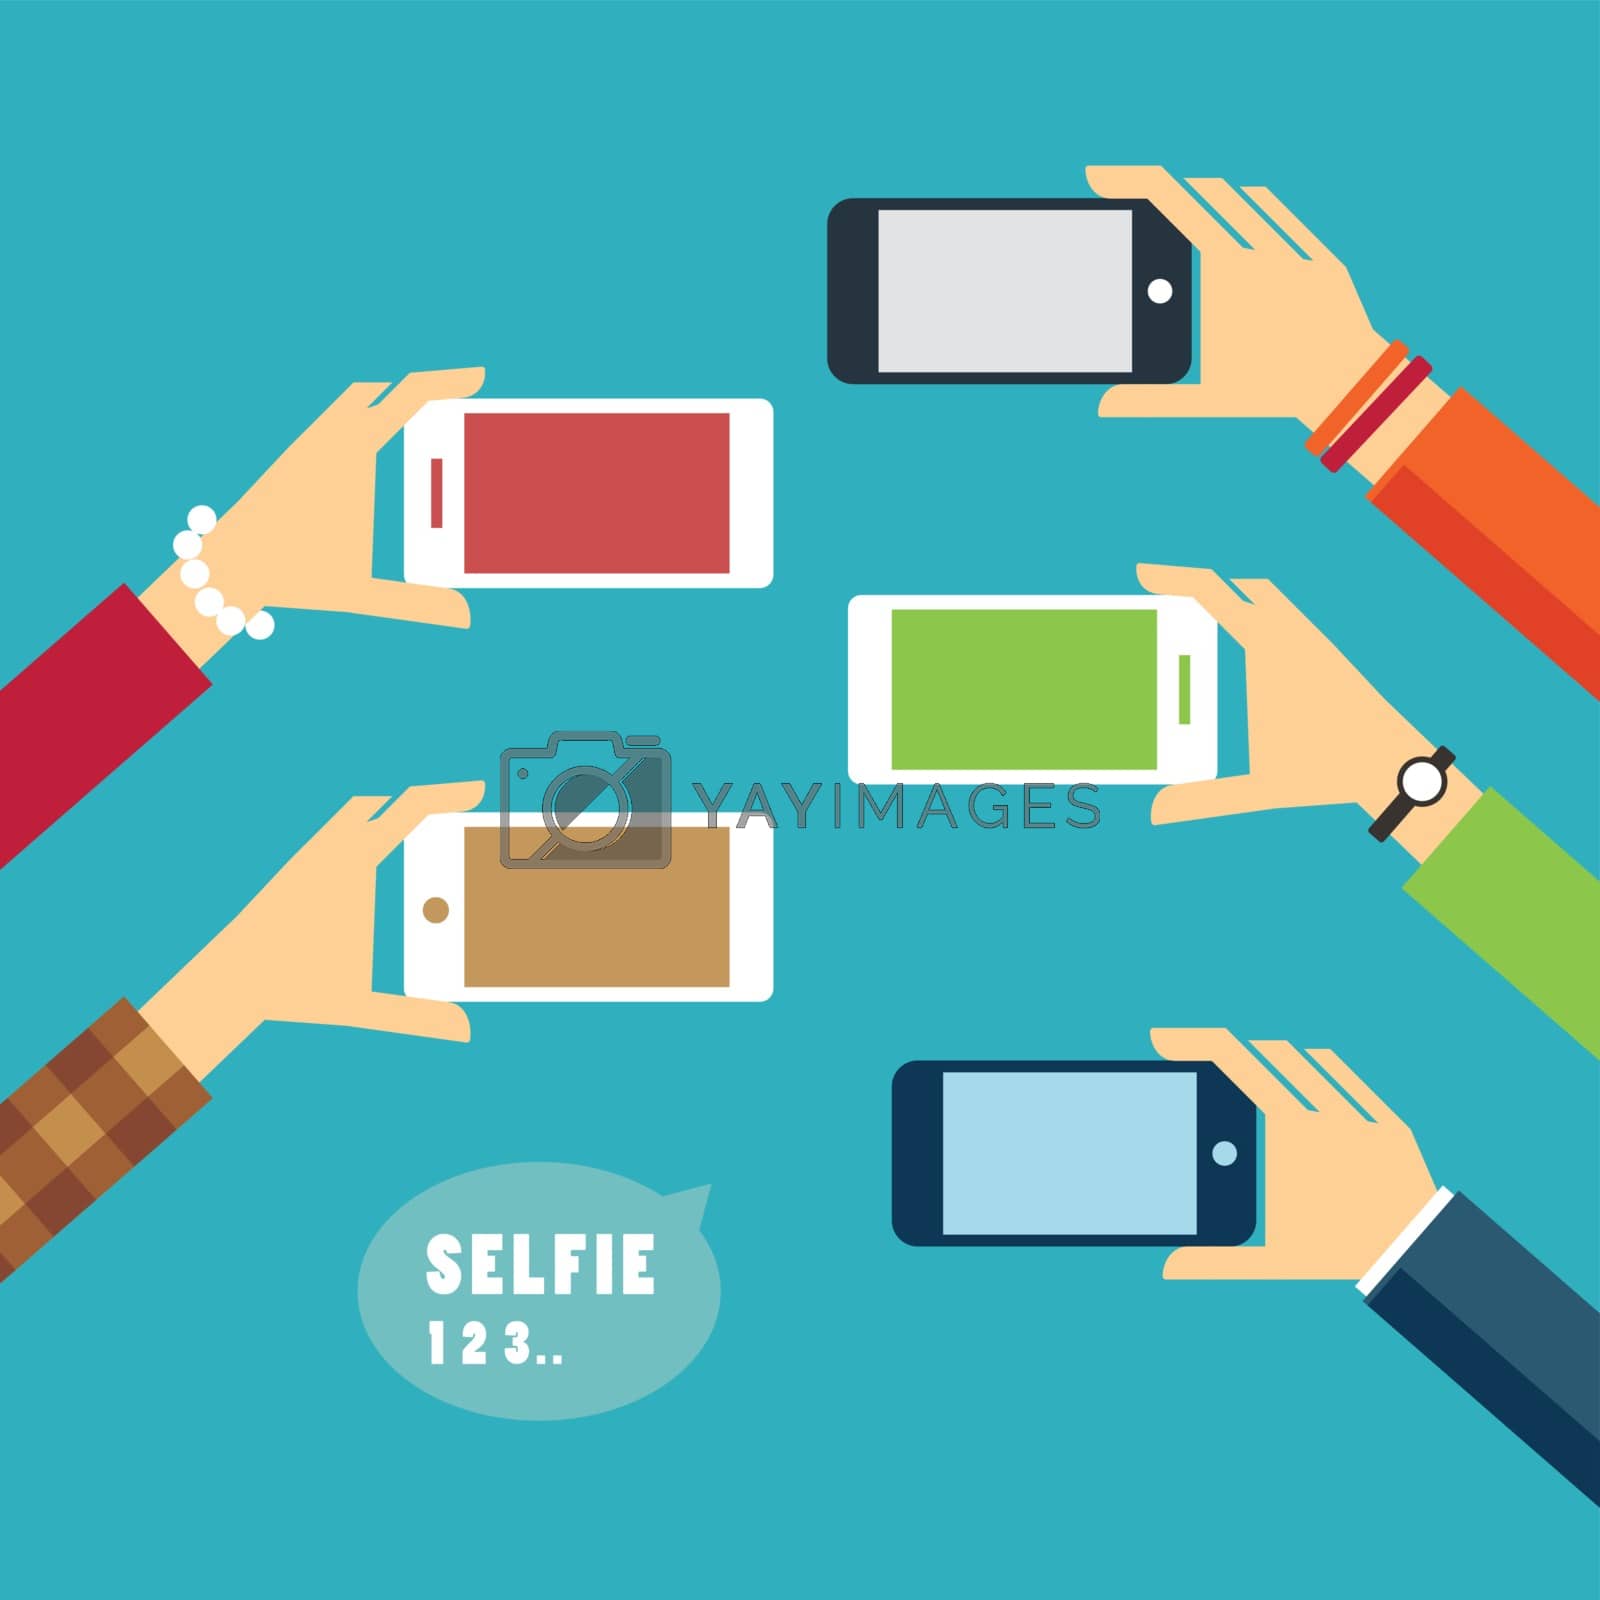 Royalty free image of taking a selfie photo flat design by kaisorn